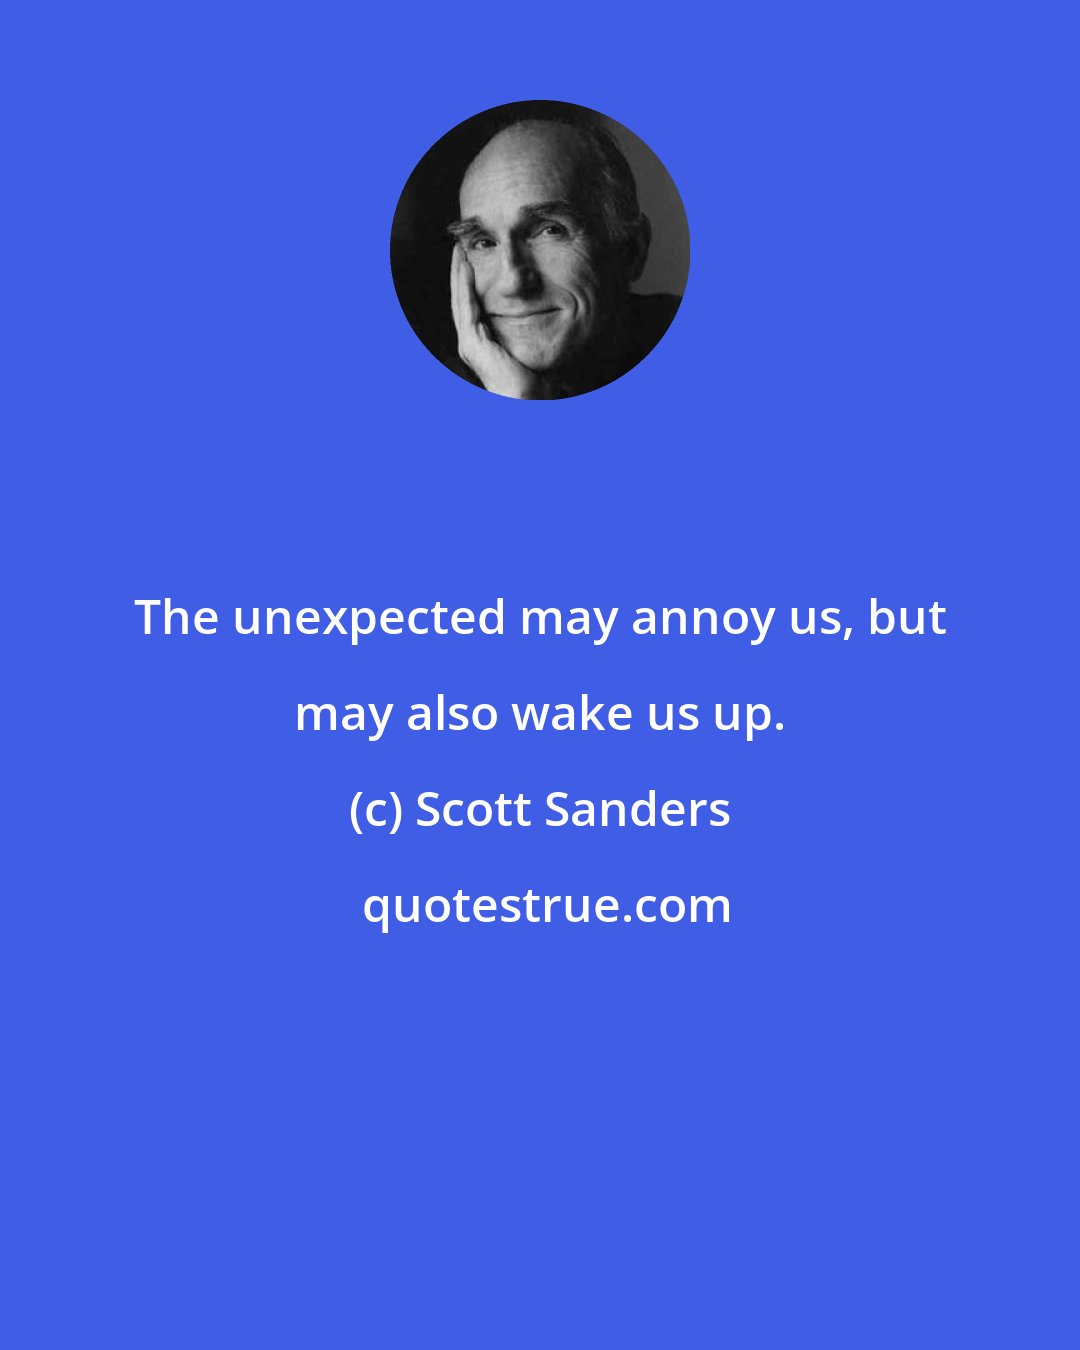 Scott Sanders: The unexpected may annoy us, but may also wake us up.